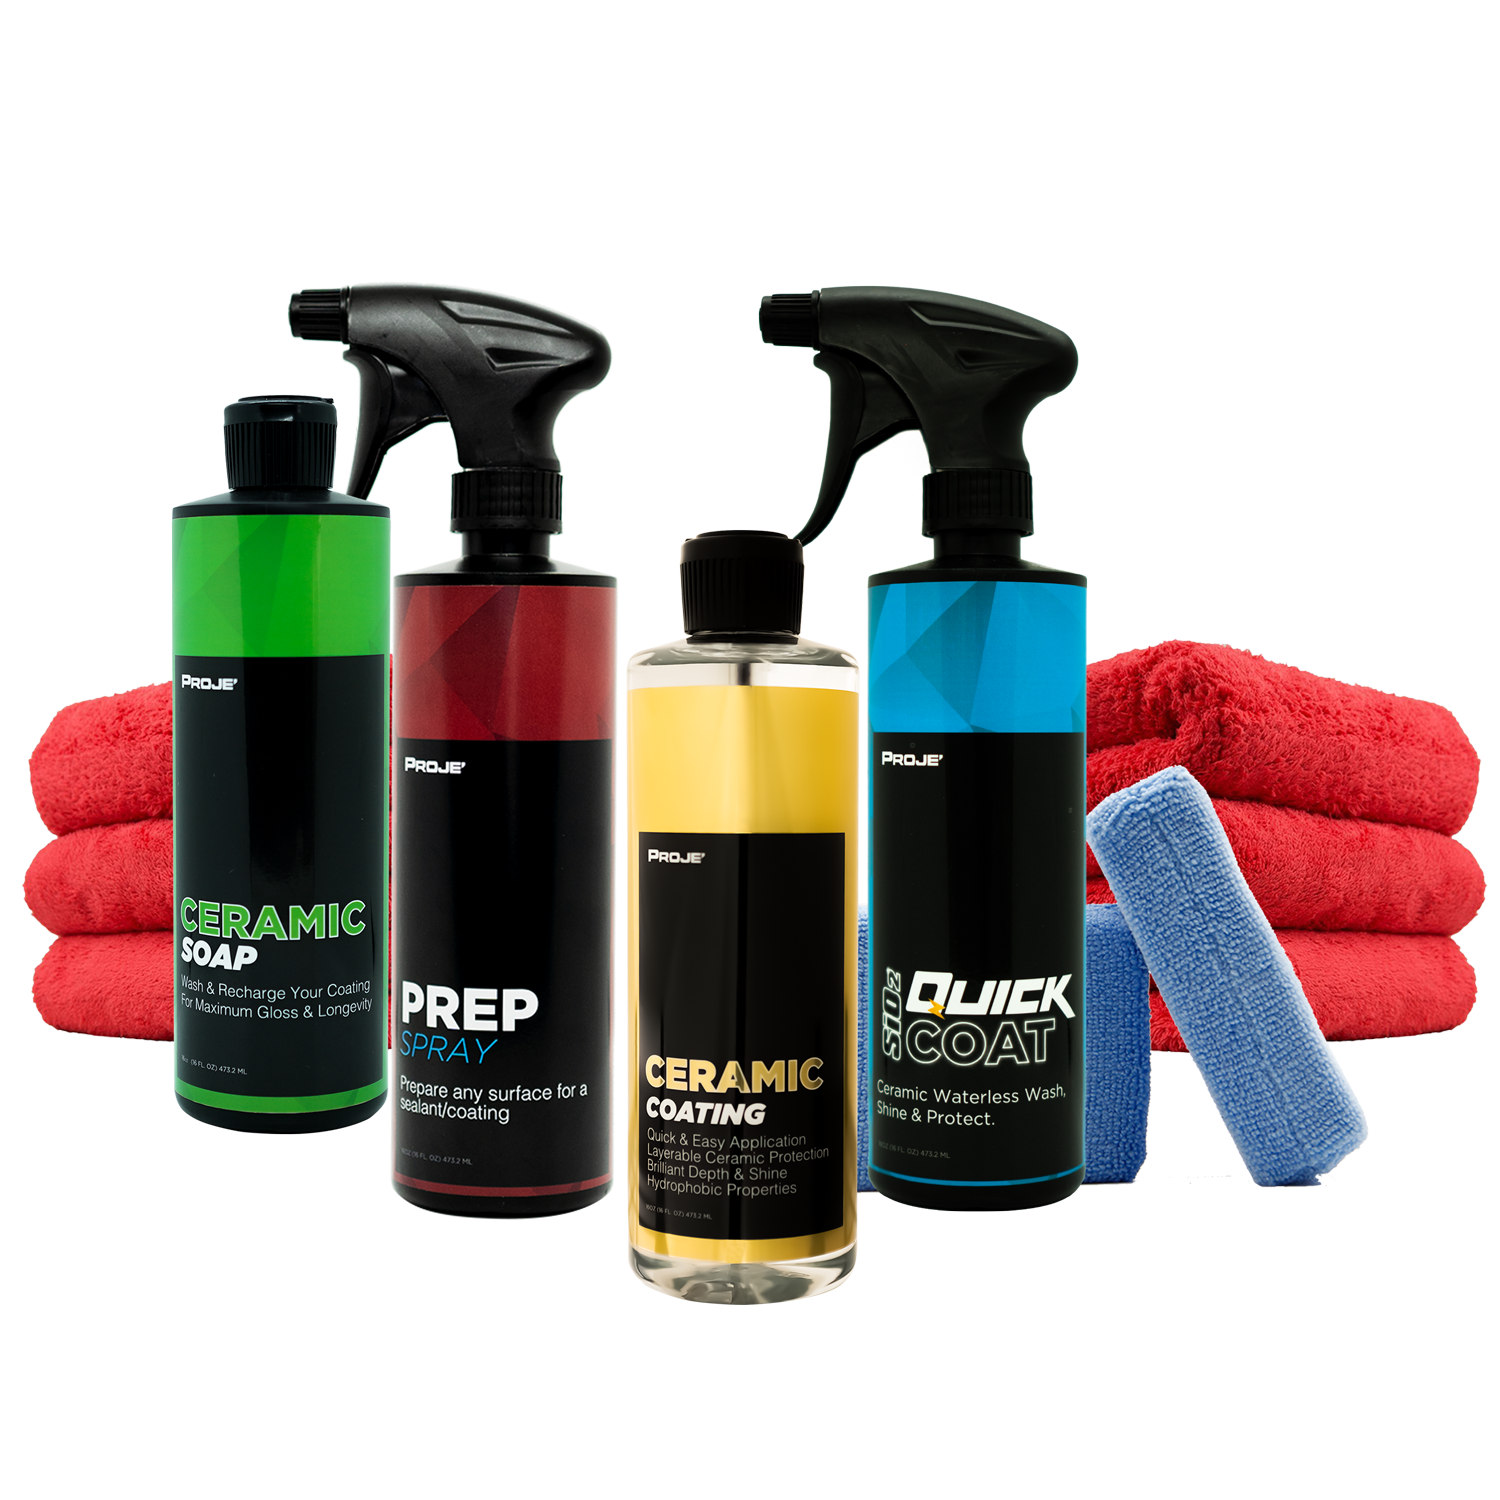 Car Cleaning Kit 'Interior & Exterior', Car Wash Concentrate, Nanotechnology Products